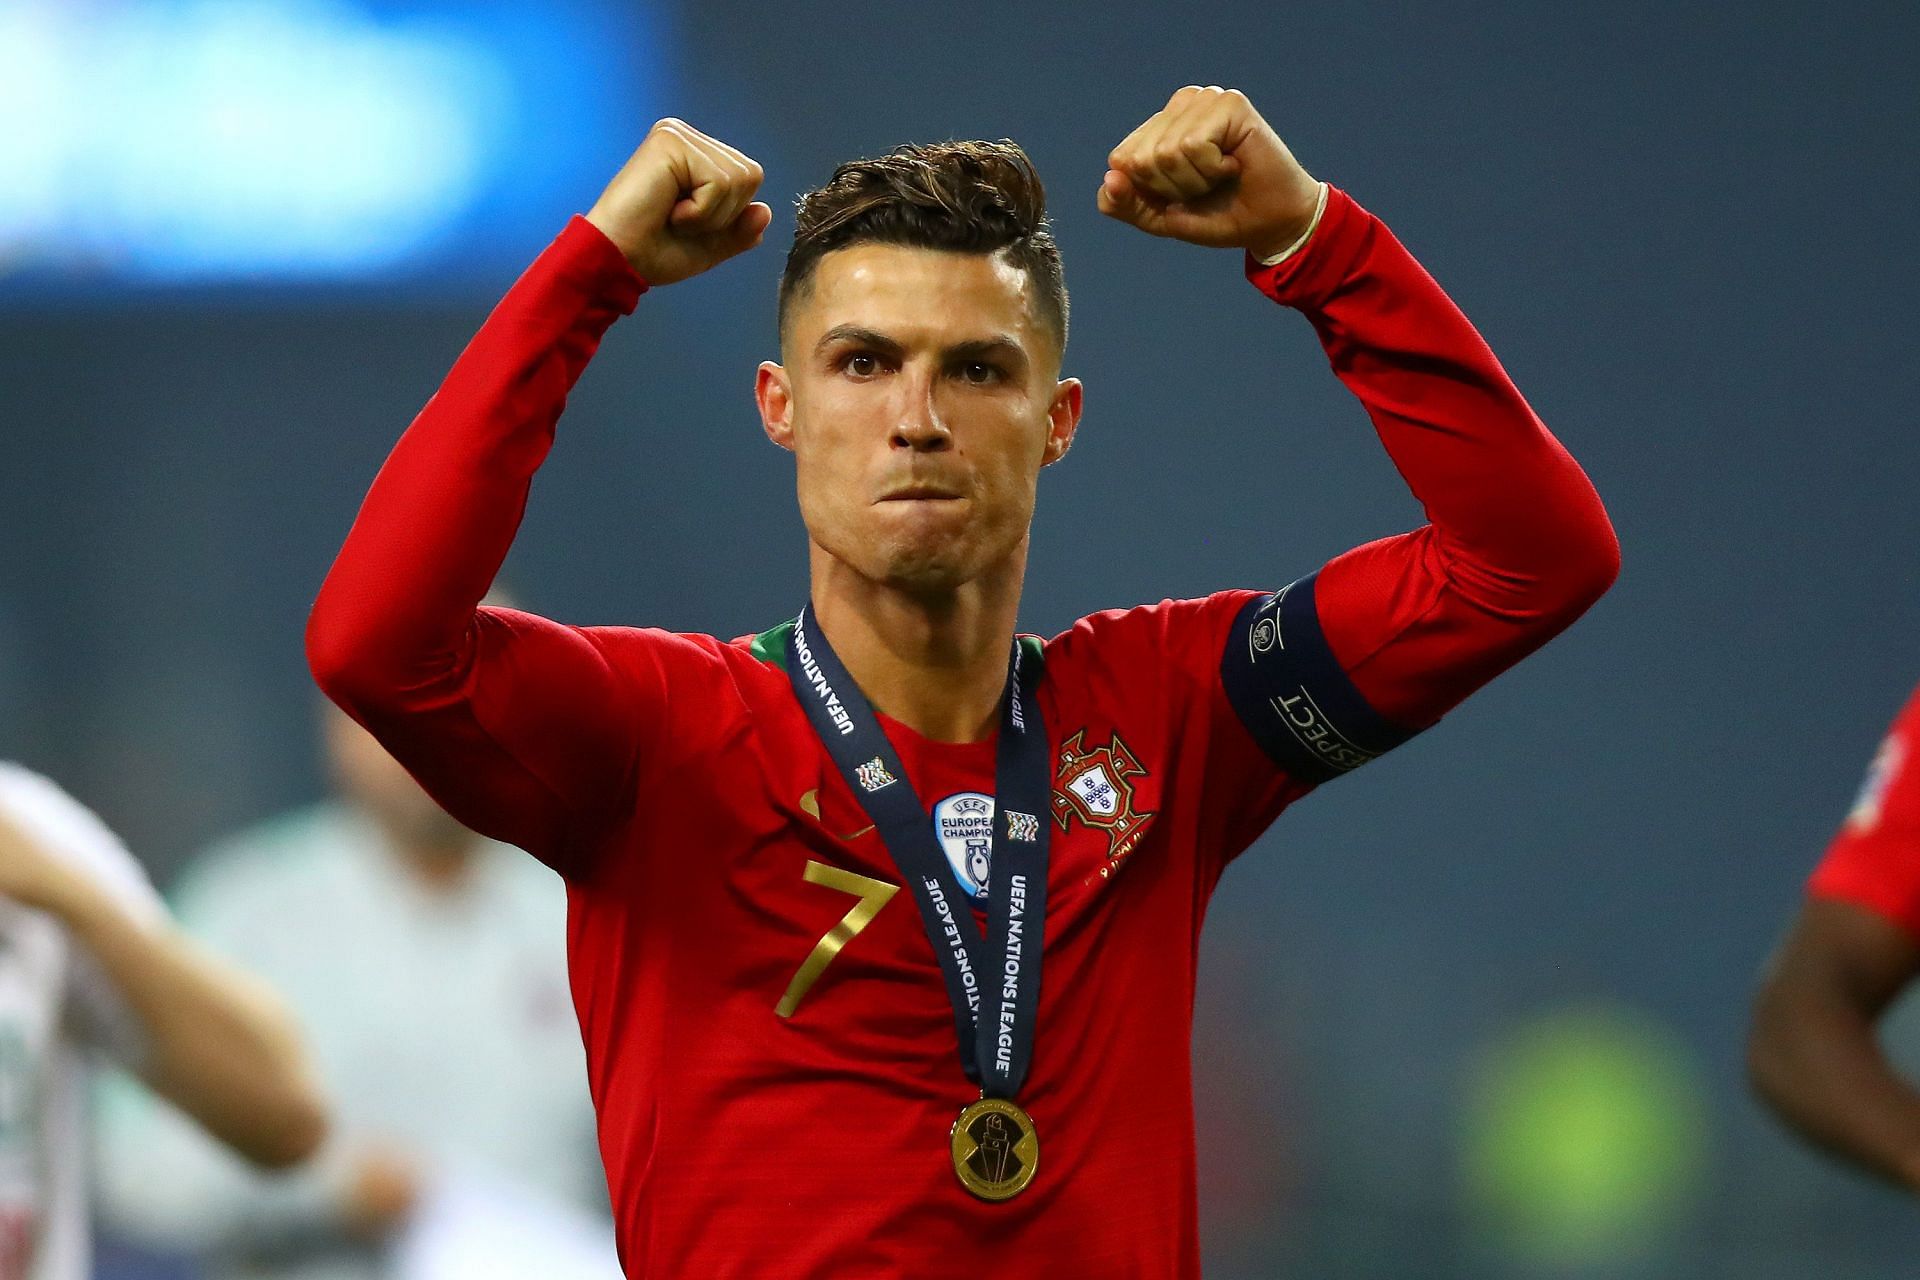 Ronaldo triumphed over the Netherlands once again in 2019